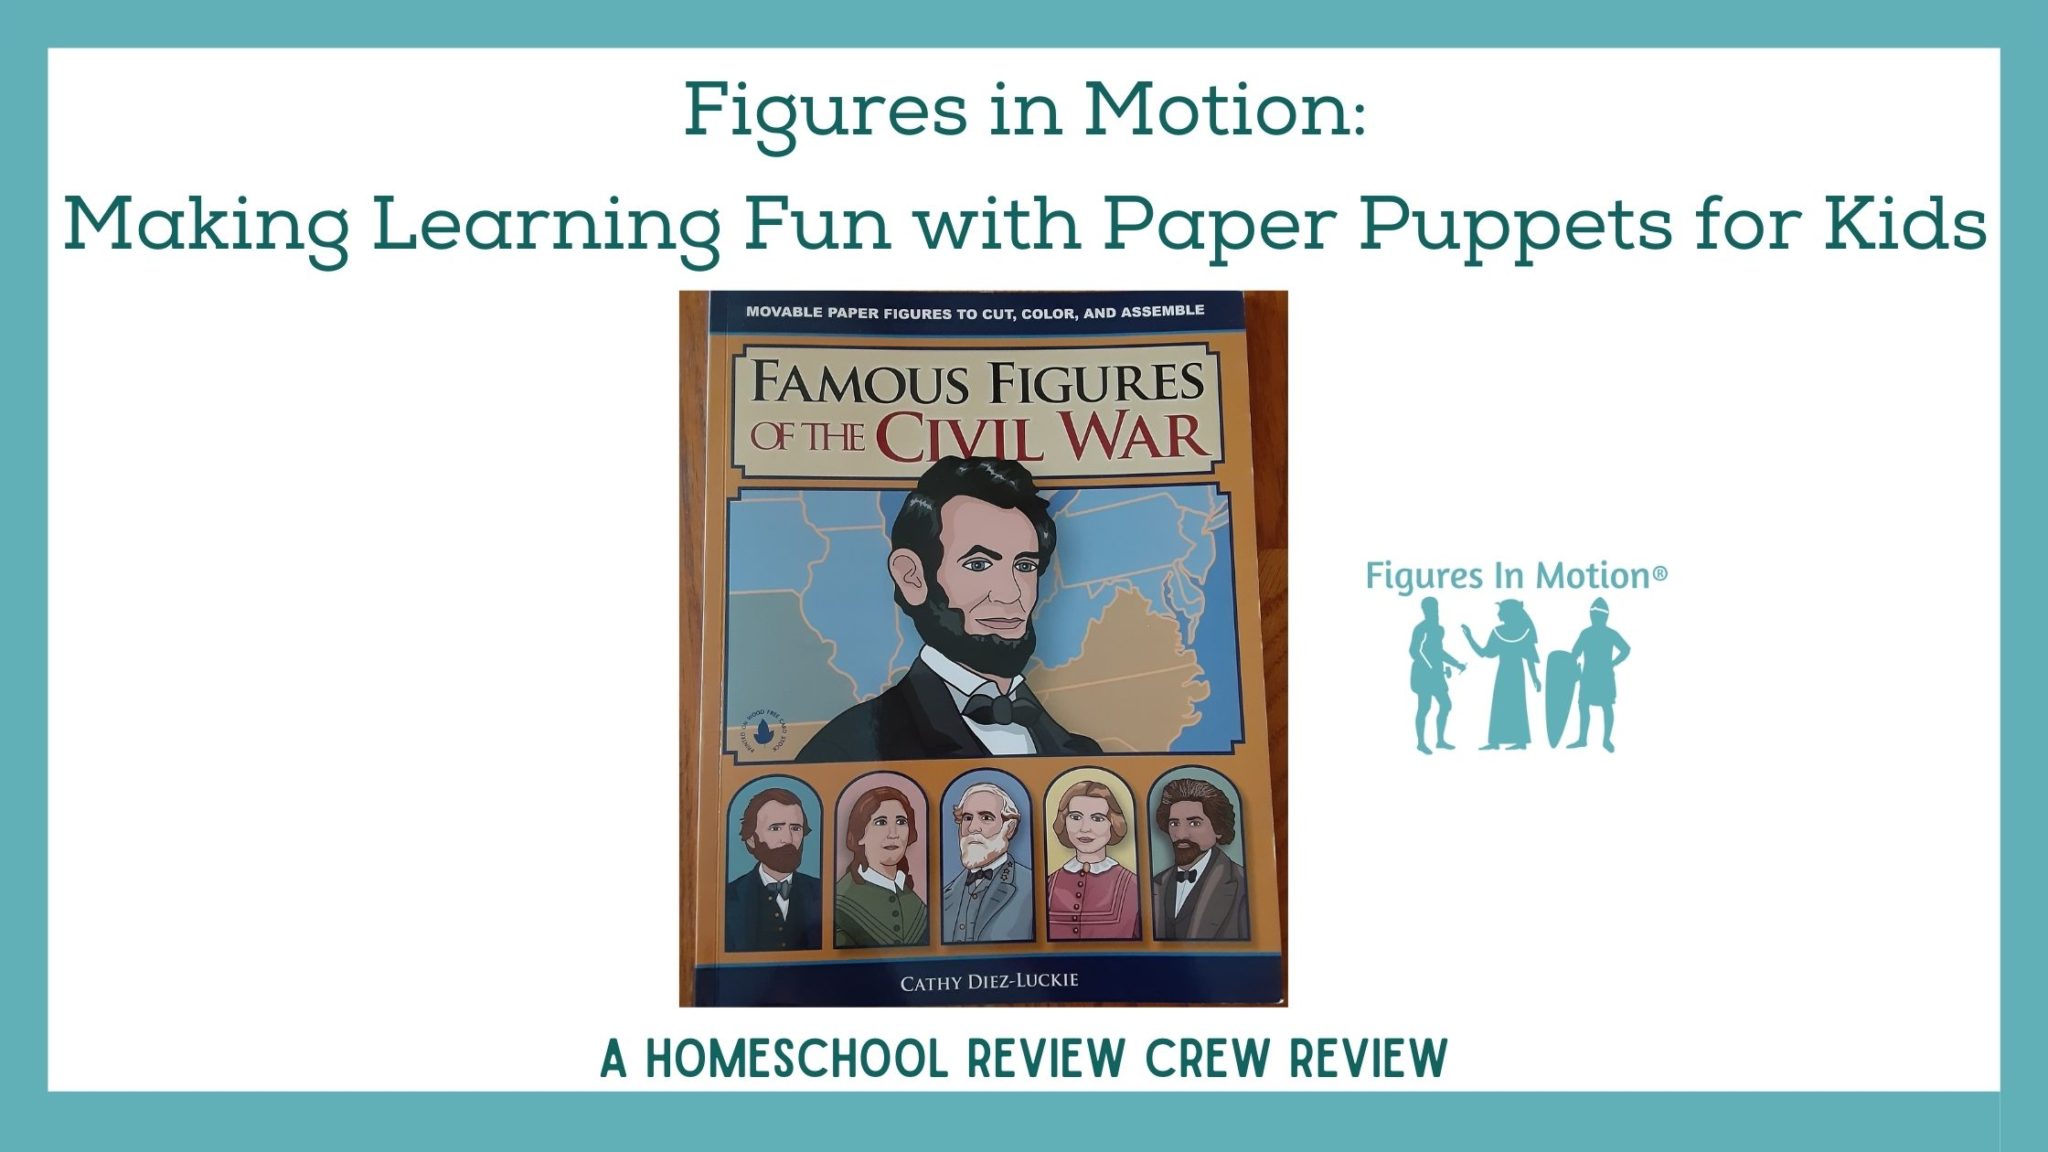 Read more about the article Figures in Motion: Making Learning Fun with Paper Puppets for Kids